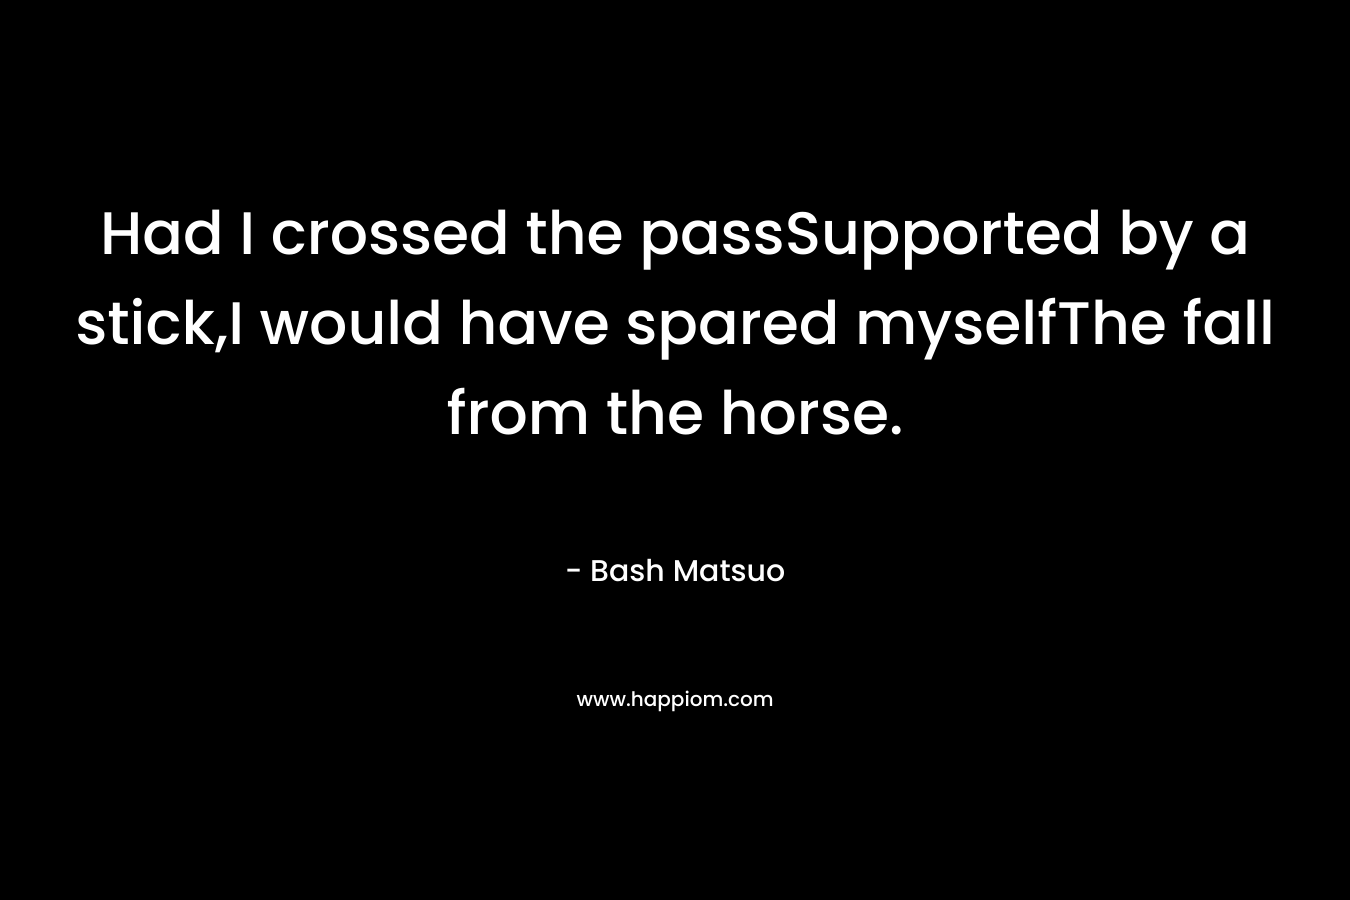 Had I crossed the passSupported by a stick,I would have spared myselfThe fall from the horse. – Bash Matsuo